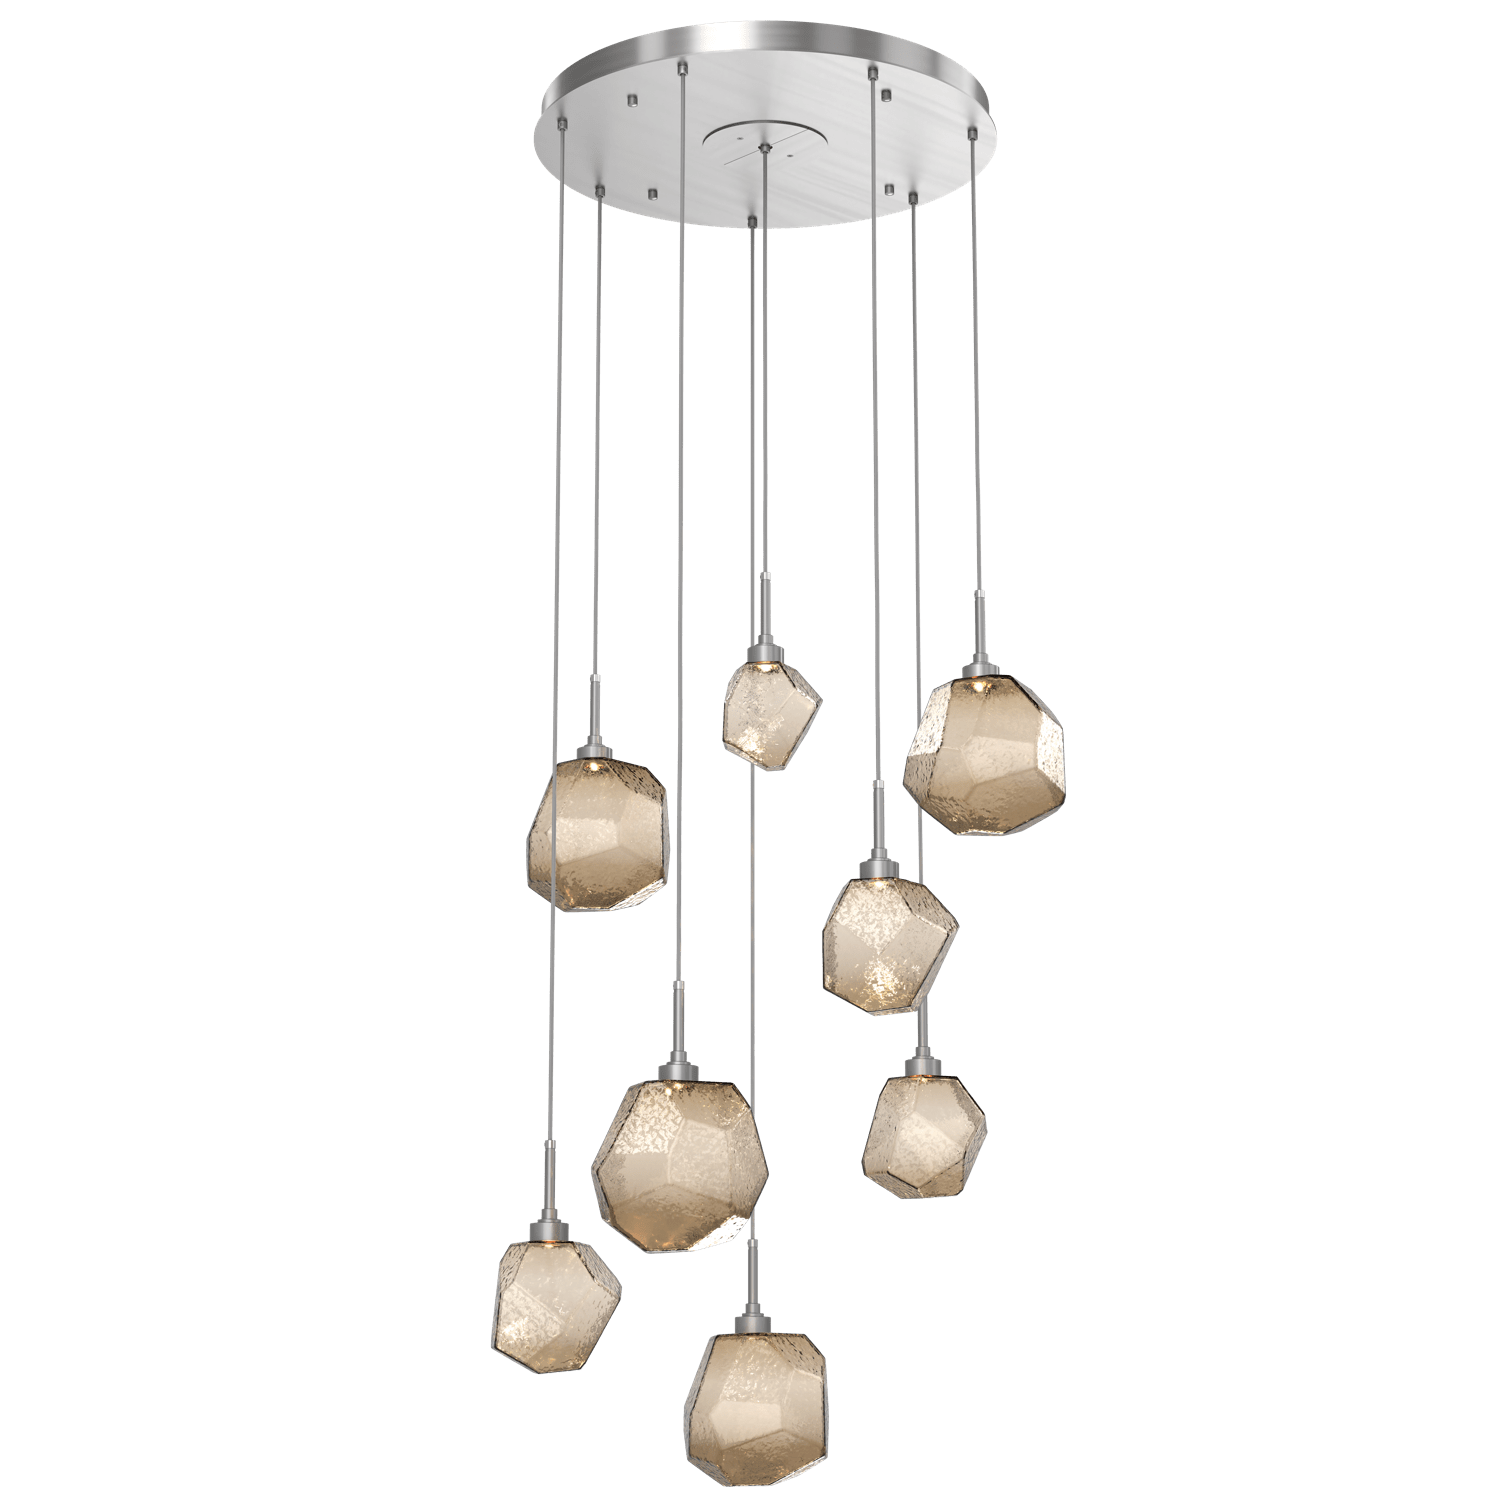 CHB0039-08-SN-B-Hammerton-Studio-Gem-8-light-round-pendant-chandelier-with-satin-nickel-finish-and-bronze-blown-glass-shades-and-LED-lamping